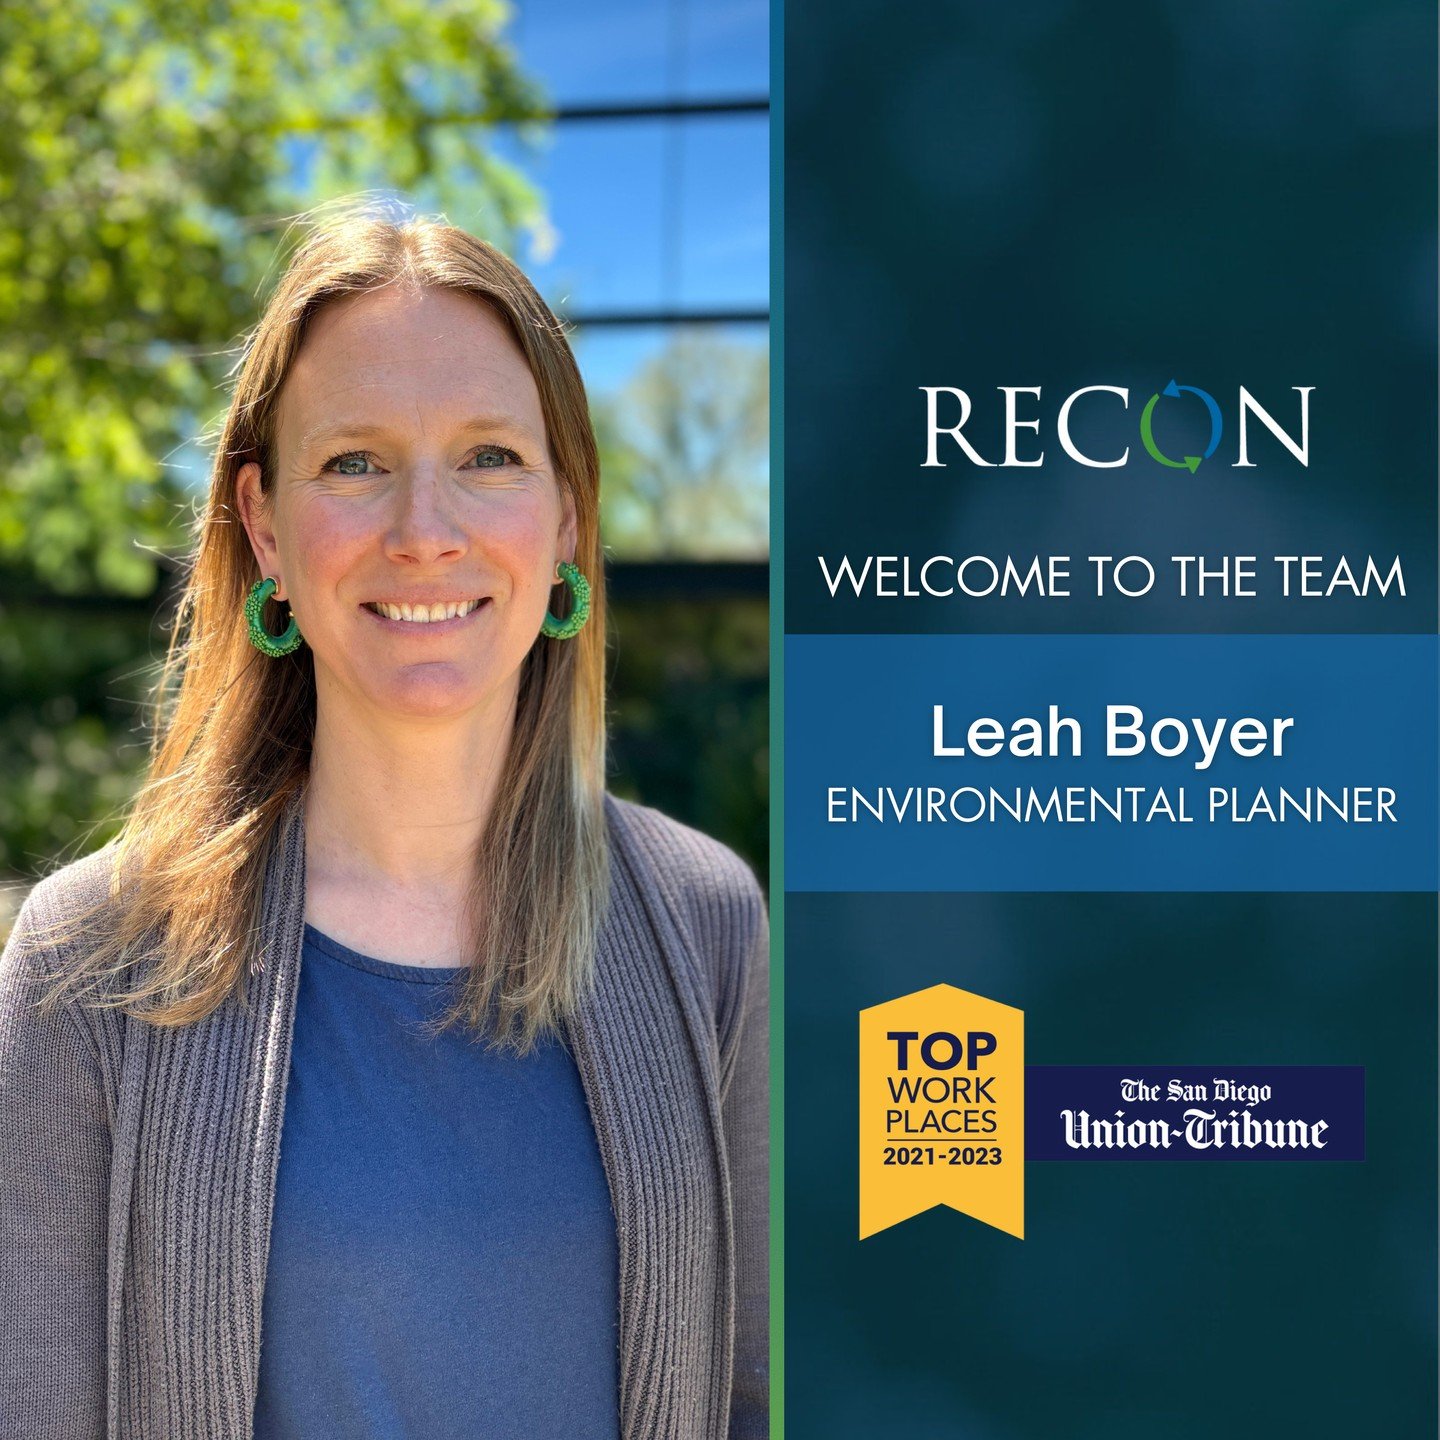 #welcome Leah Boyer! Leah joins @reconenv as an Environmental Planner. She has a Masters in Urban and Regional Planning from @ucirvine and a B.A. in Conservation Biology &amp; a B.A. in Cultural Anthropology from @uwmadison. With prior experience as 